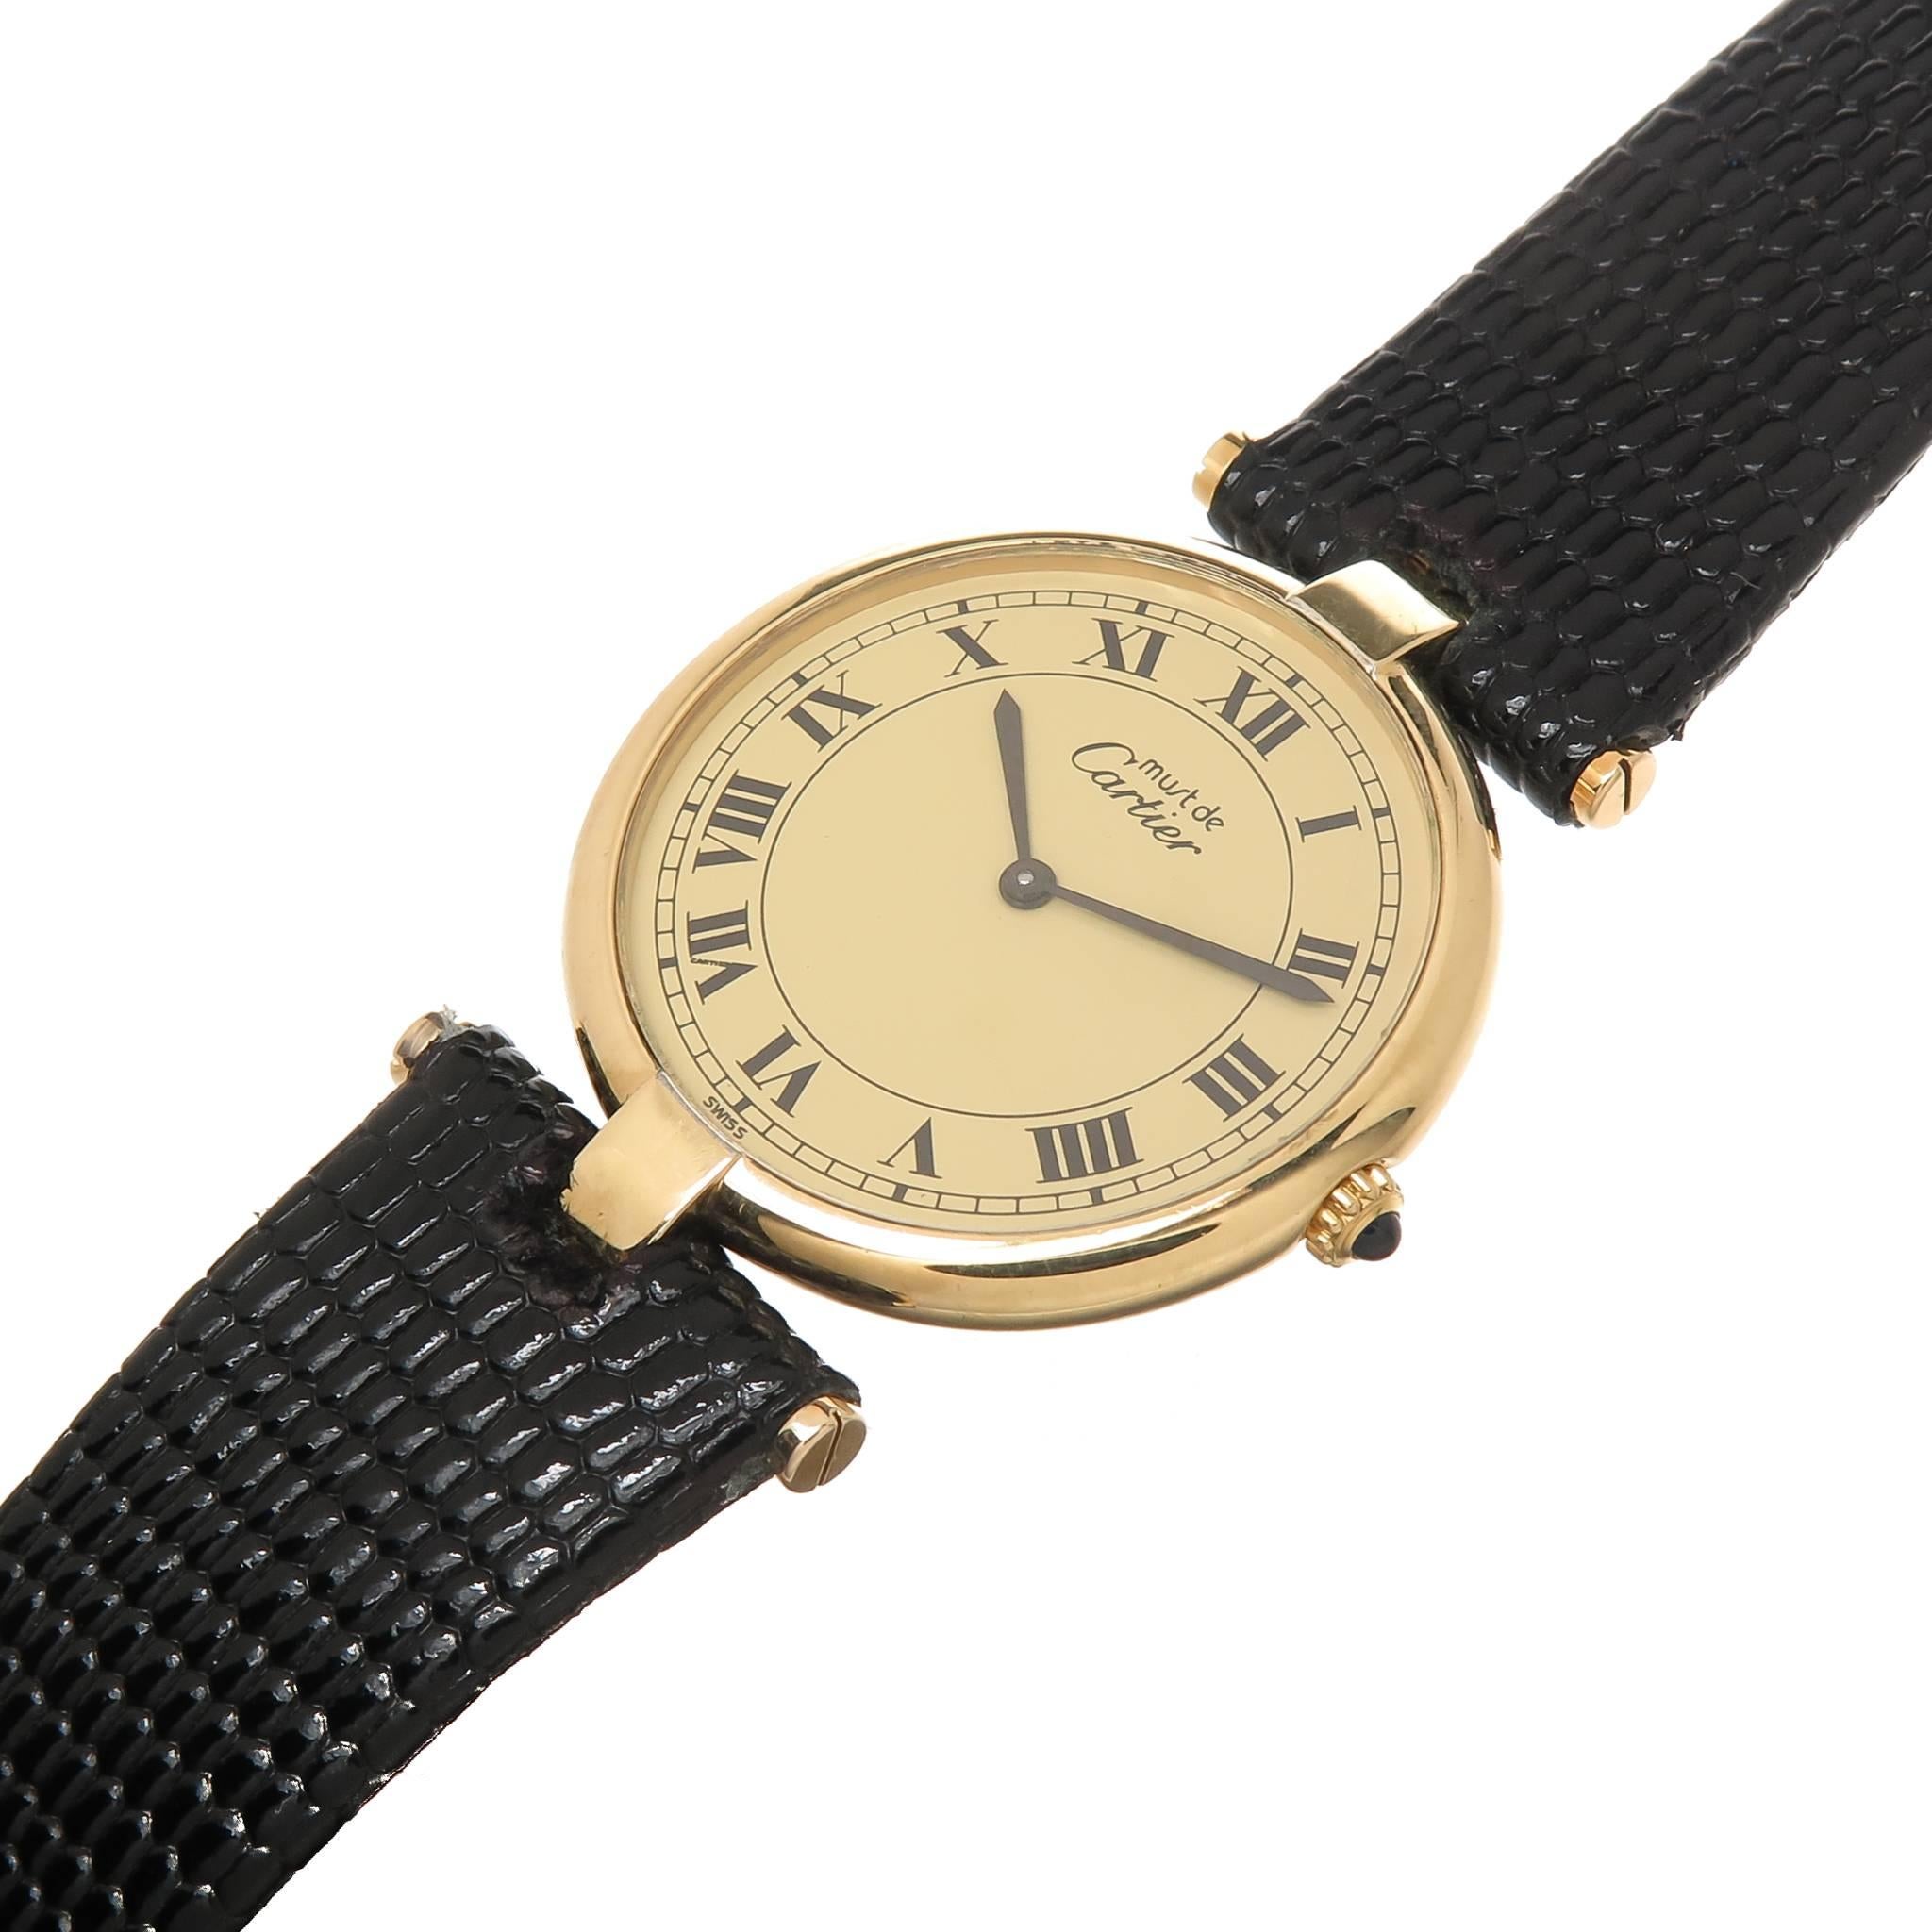 Circa 2000 Cartier Vermeil, Gold Plate on Sterling Silver, Must De Cartier Watch. 30 MM Water Resistant case, Quartz Movement, Gold Dial with Black Roman Numerals, Sapphire Crown. New Black Leather Strap. Comes in a Suede Cartier pouch and has its